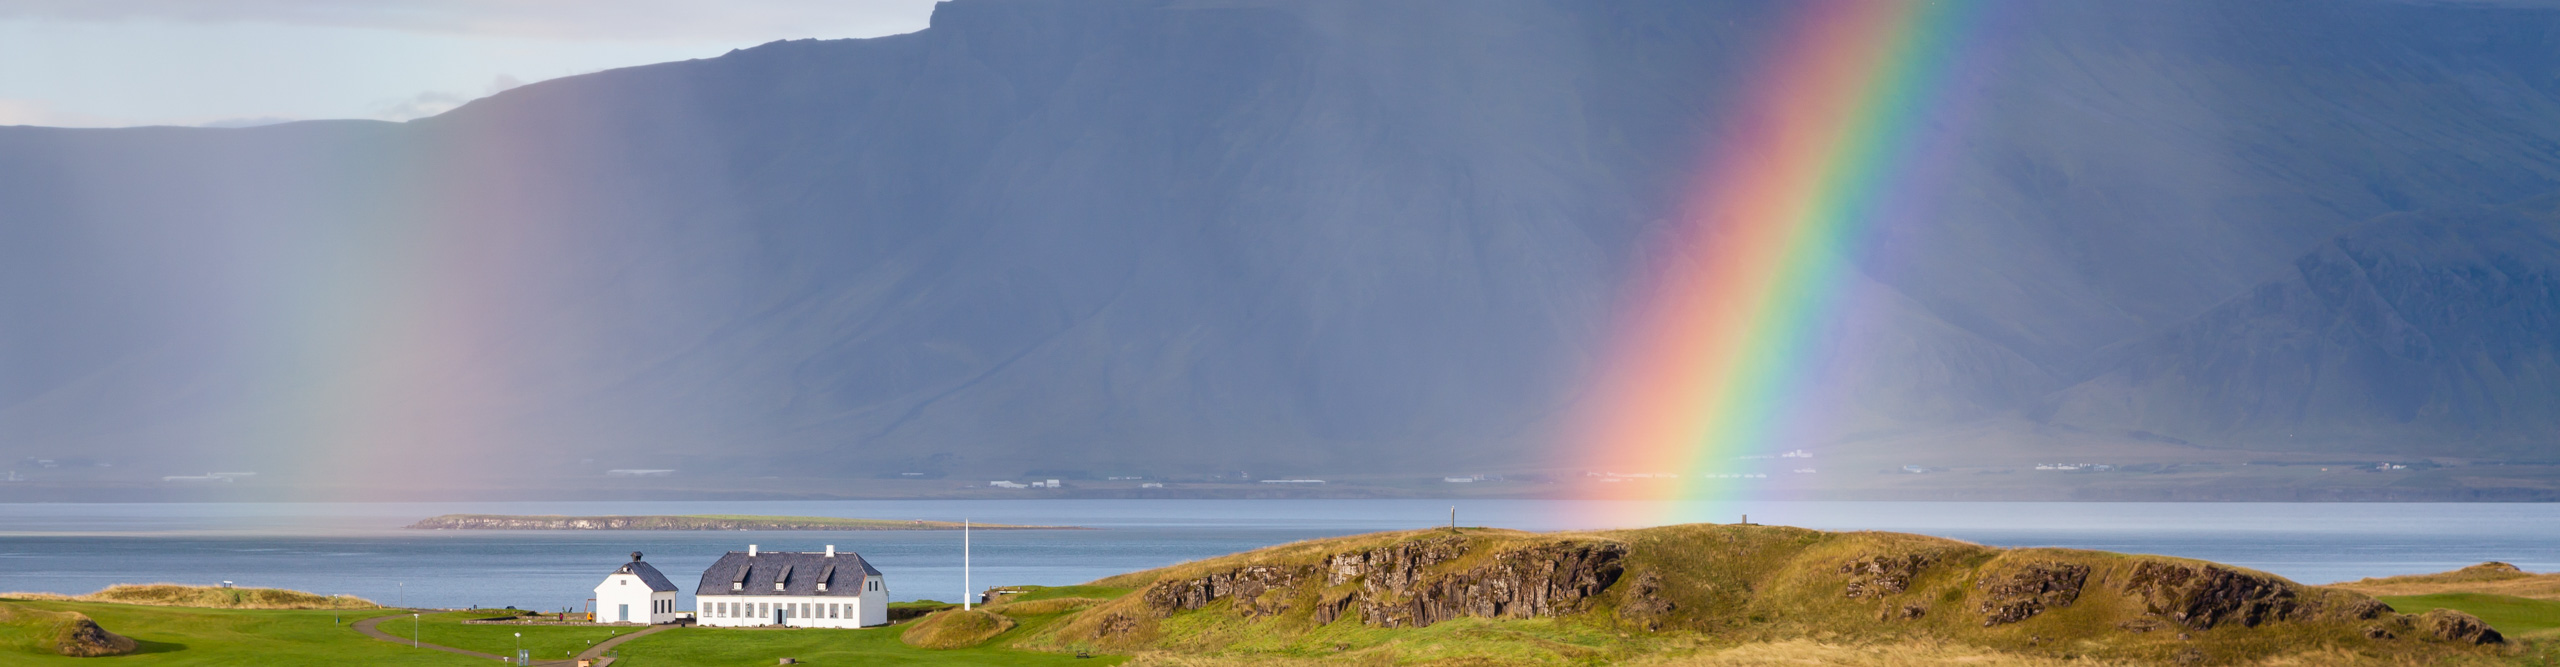 Rainbow over the harbour with mountains in the background, near Reykjavik, Iceland